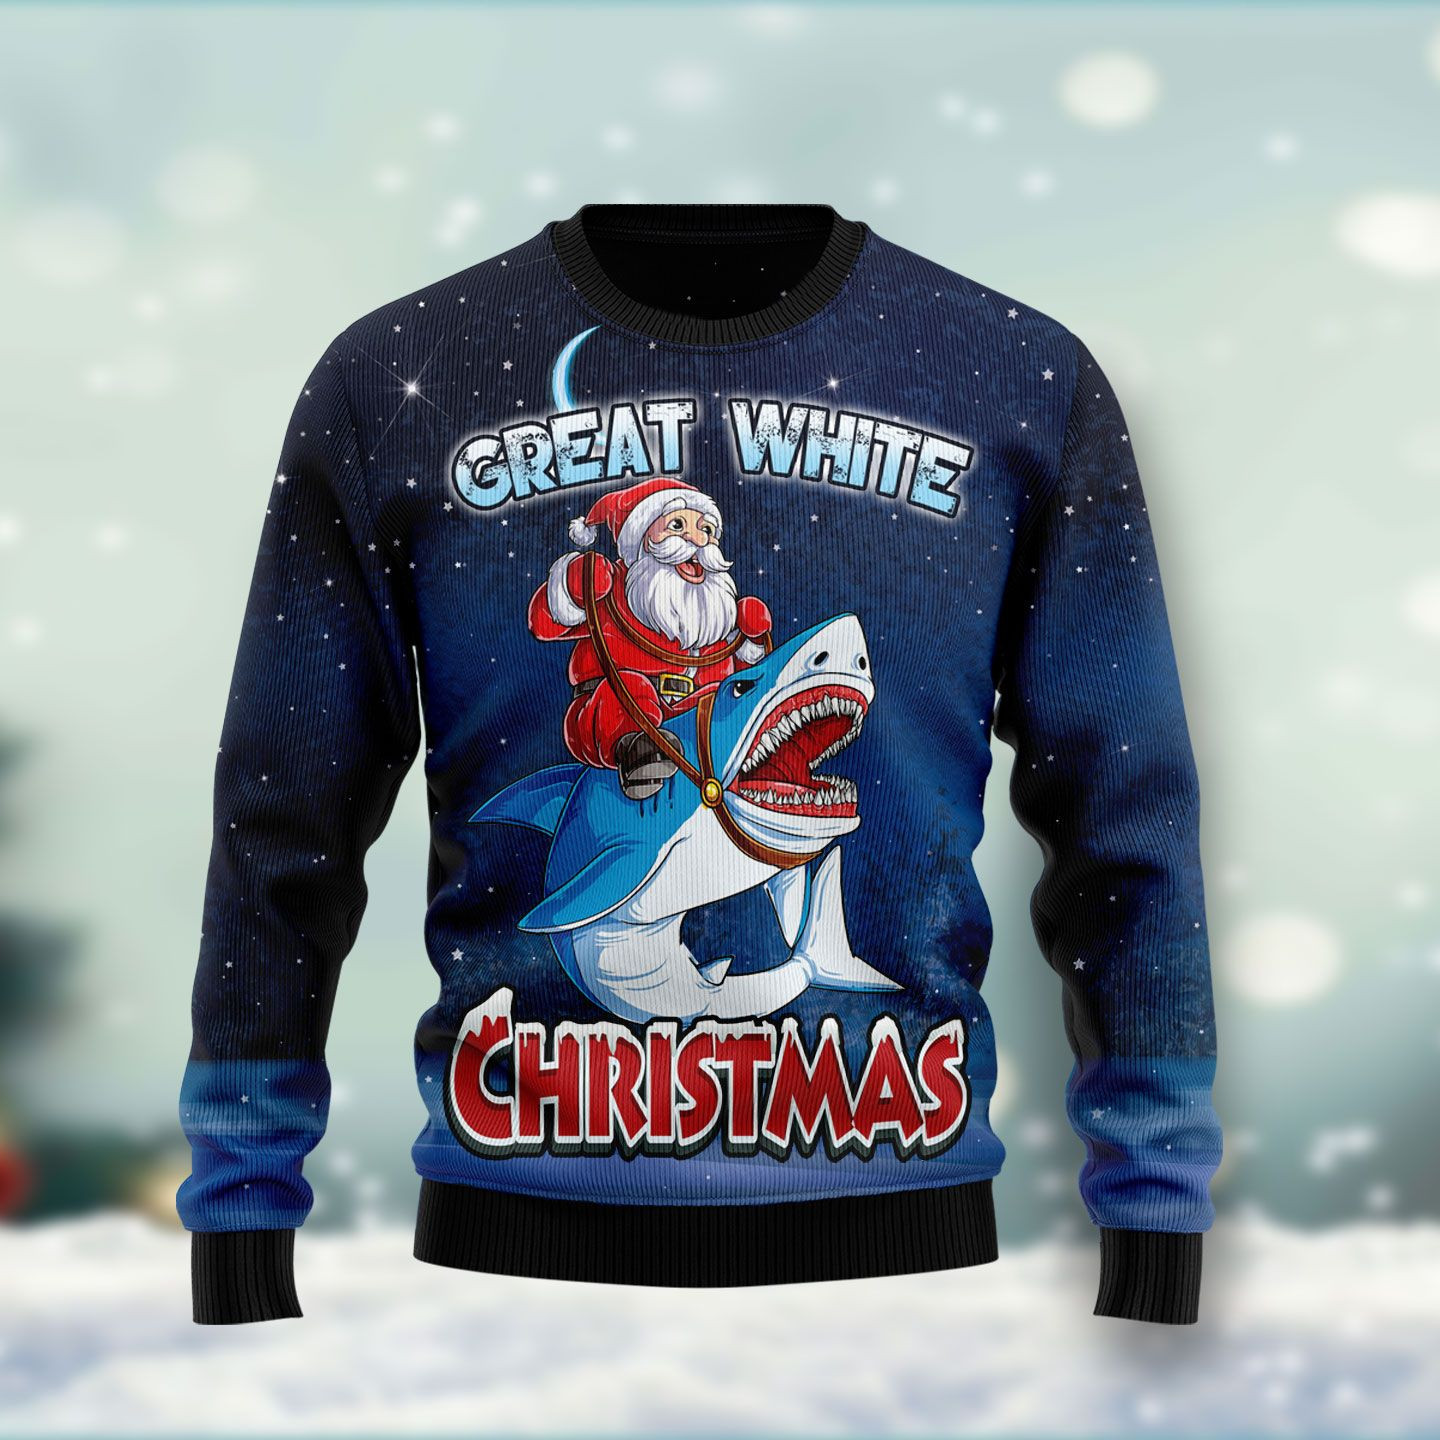 Great White Christmas Shark Ugly Christmas Sweater Ugly Sweater For Men Women, Holiday Sweater